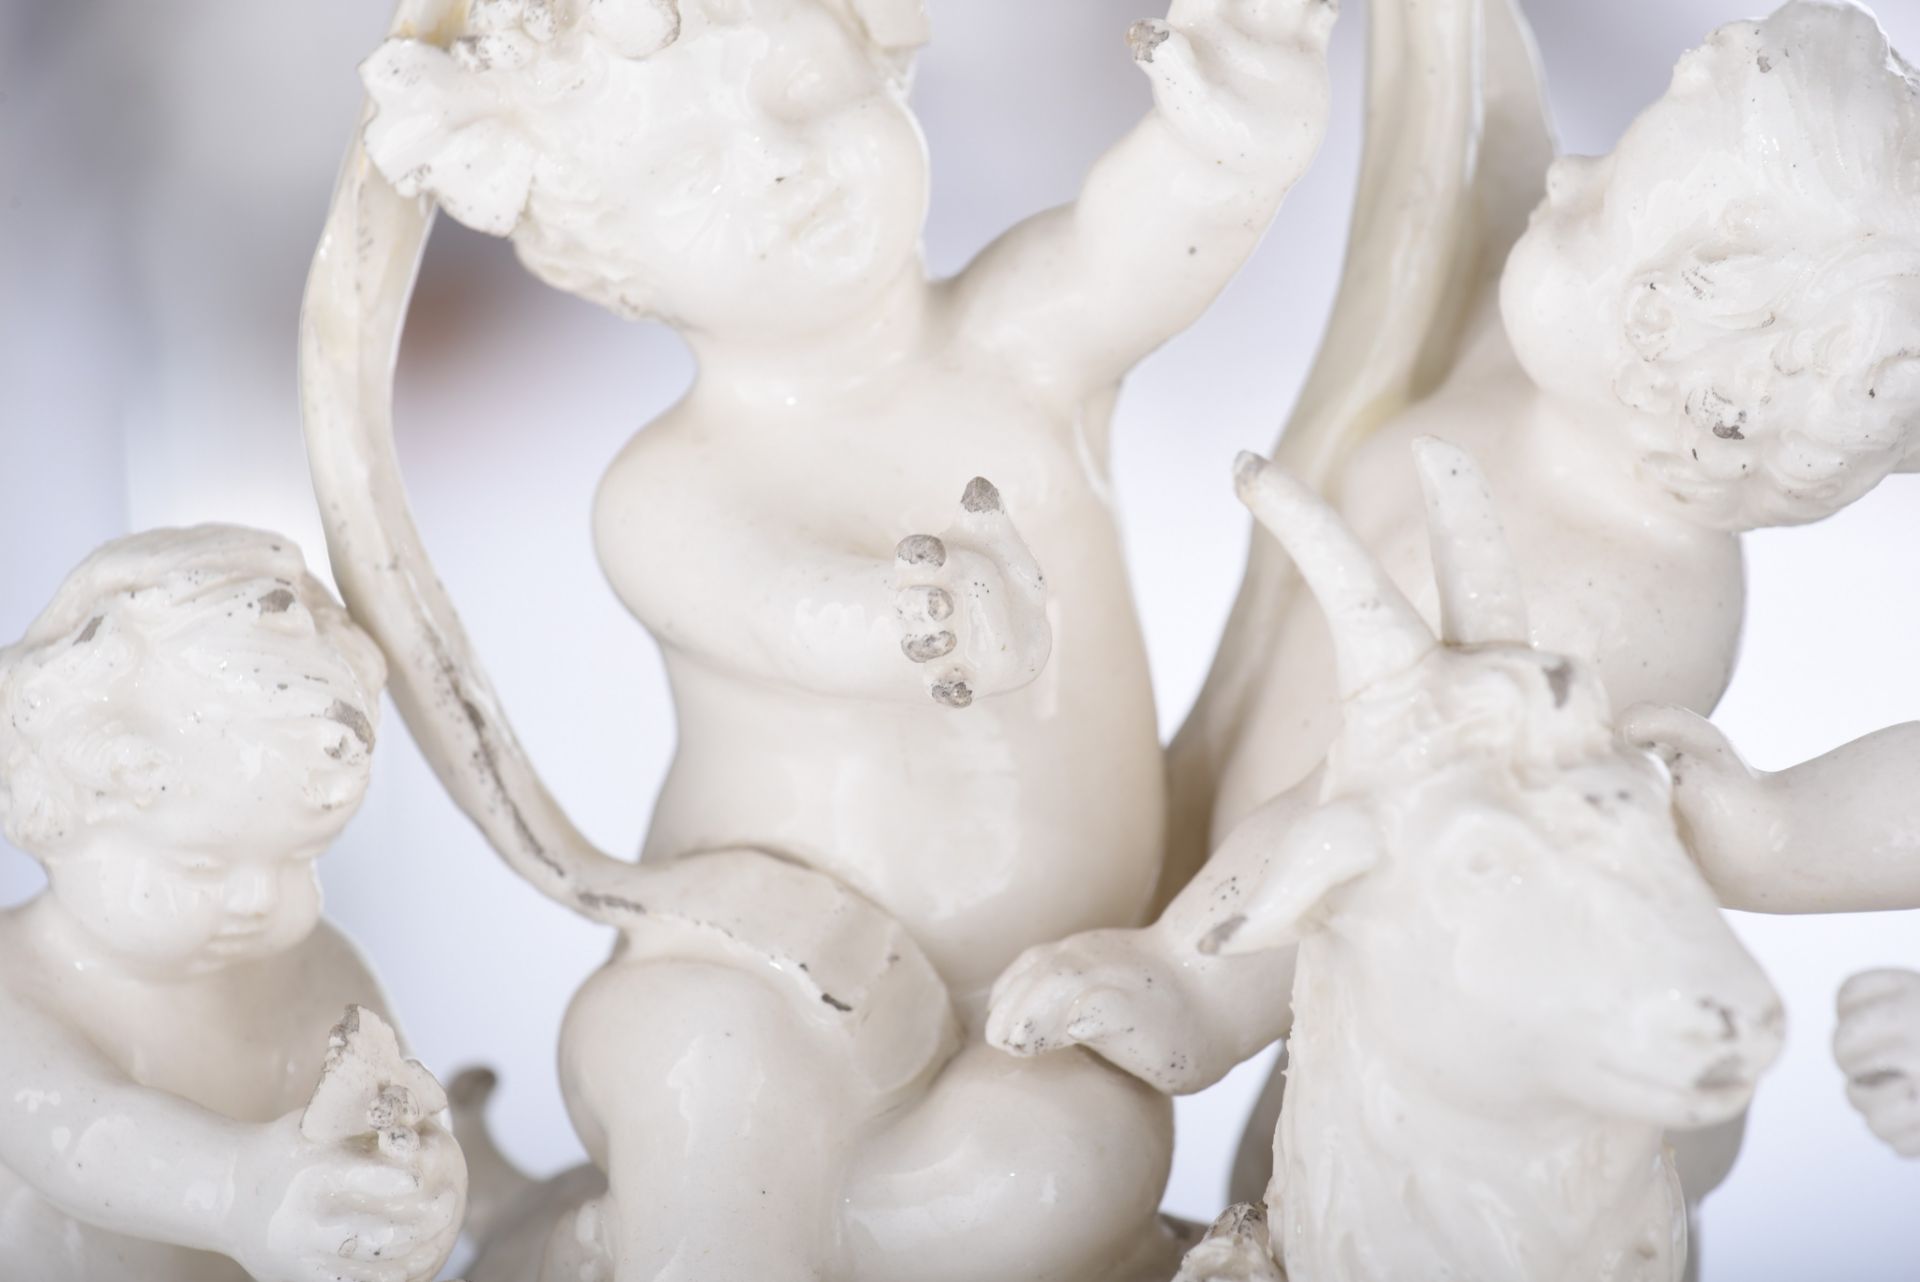 (BIDDING ONLY ON CARLOBONTE.BE) Two white glazed Capodimonte figural groups, Naples, H 20 - 23 cm - Image 9 of 16